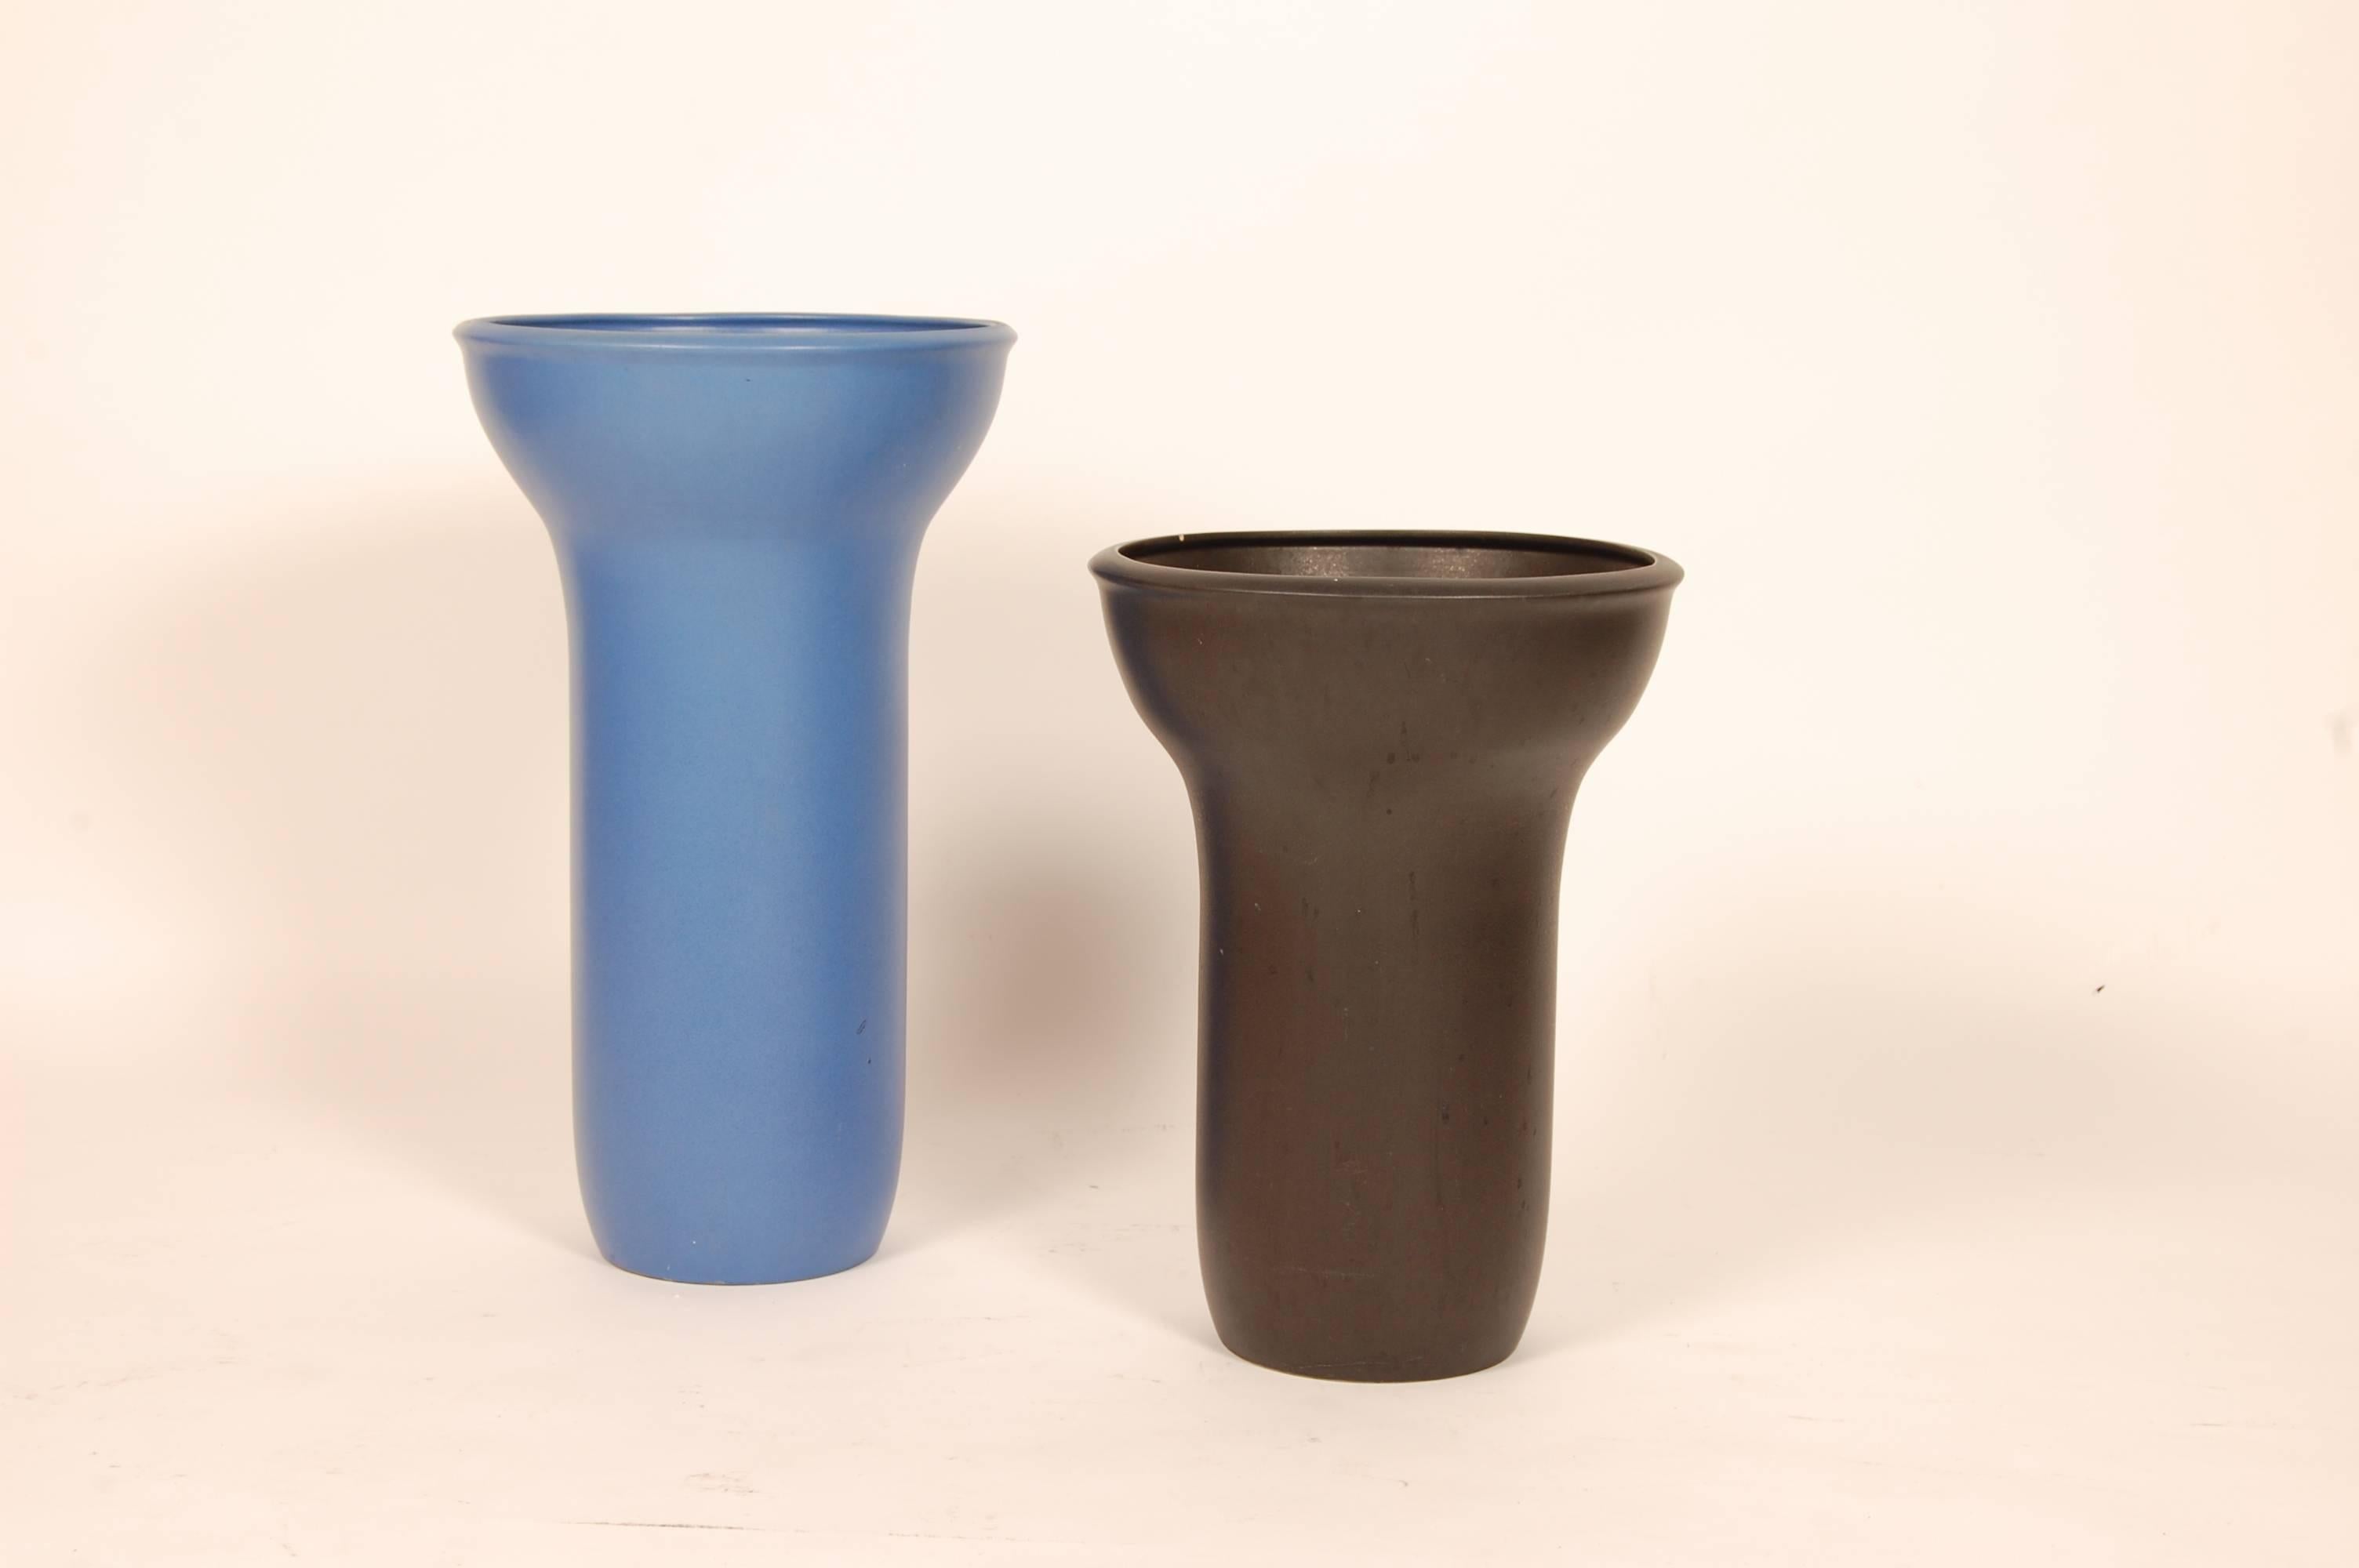 Pair of rare Raul Coronal ceramic planters for Architectural Pottery, circa 1960. One planter is a matte blue glaze (SOLD) and the other is a matte black. Can be purchased either as a pair or separately. The black planter measures 13.75